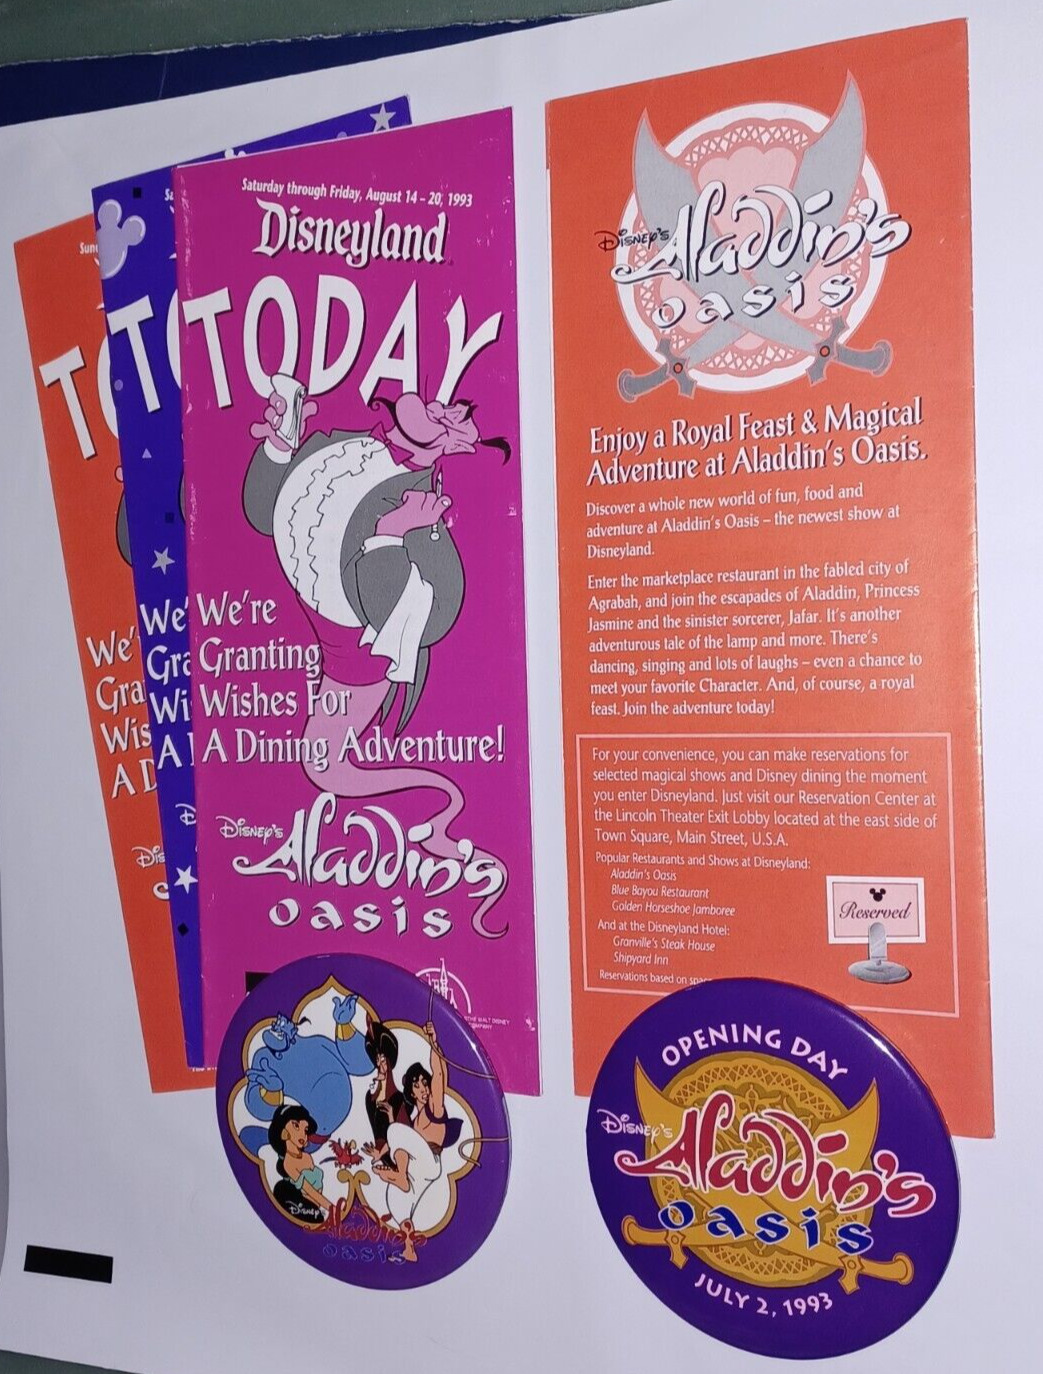 Today at Disneyland Aladdin's Oasis 1993/ 5 Programs,2 Buttons (1 Opn'g day 7/2)